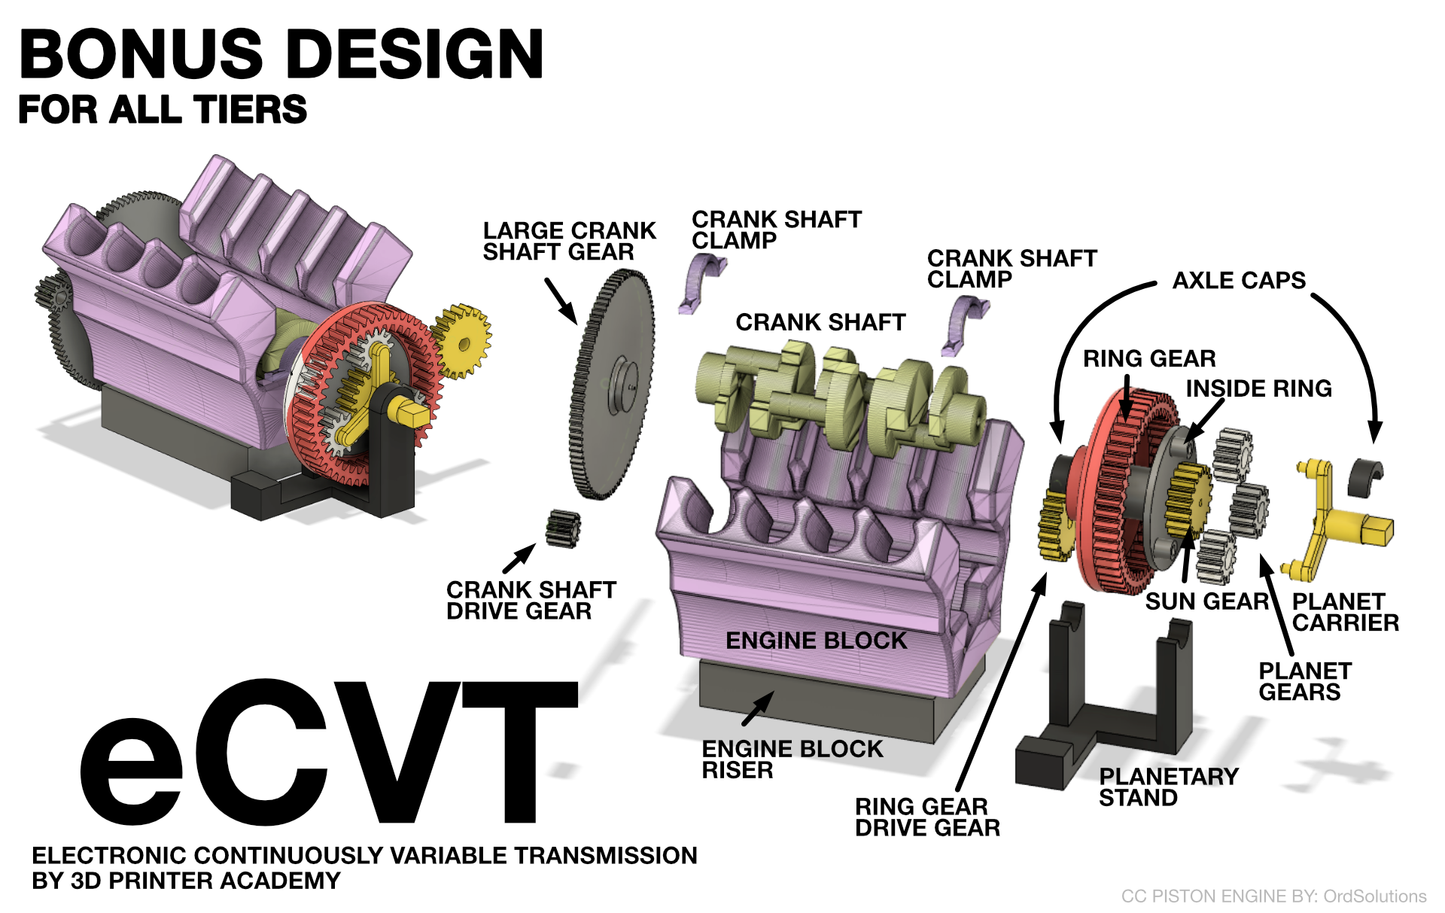 eCVT - Continuously Variable Transmission Model